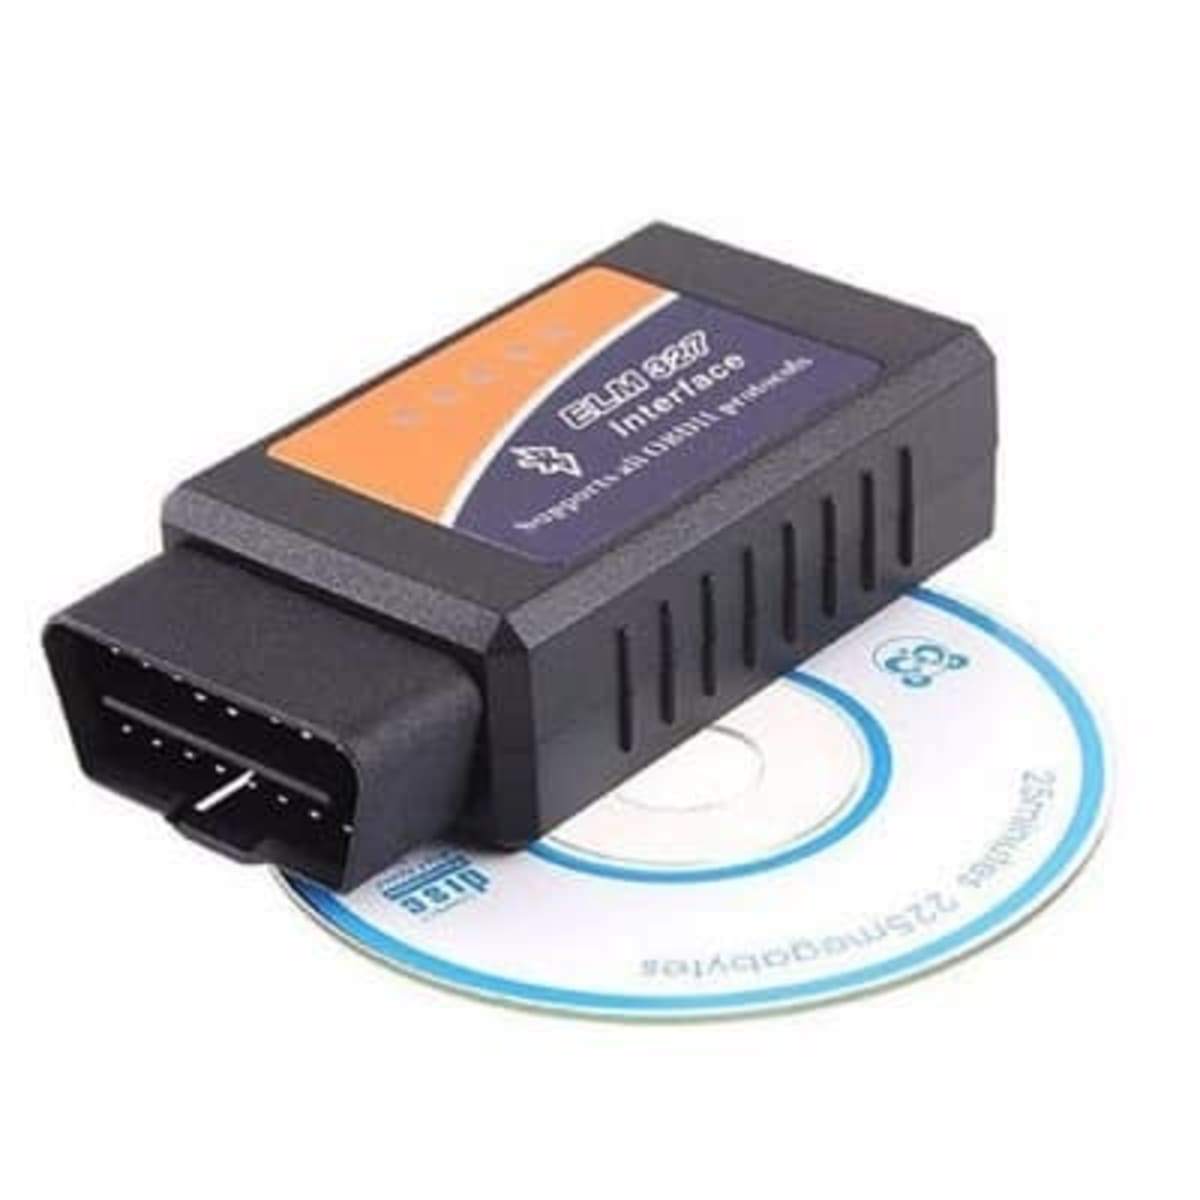 ELM327 OBD2 Interface Adapter Complete Guide